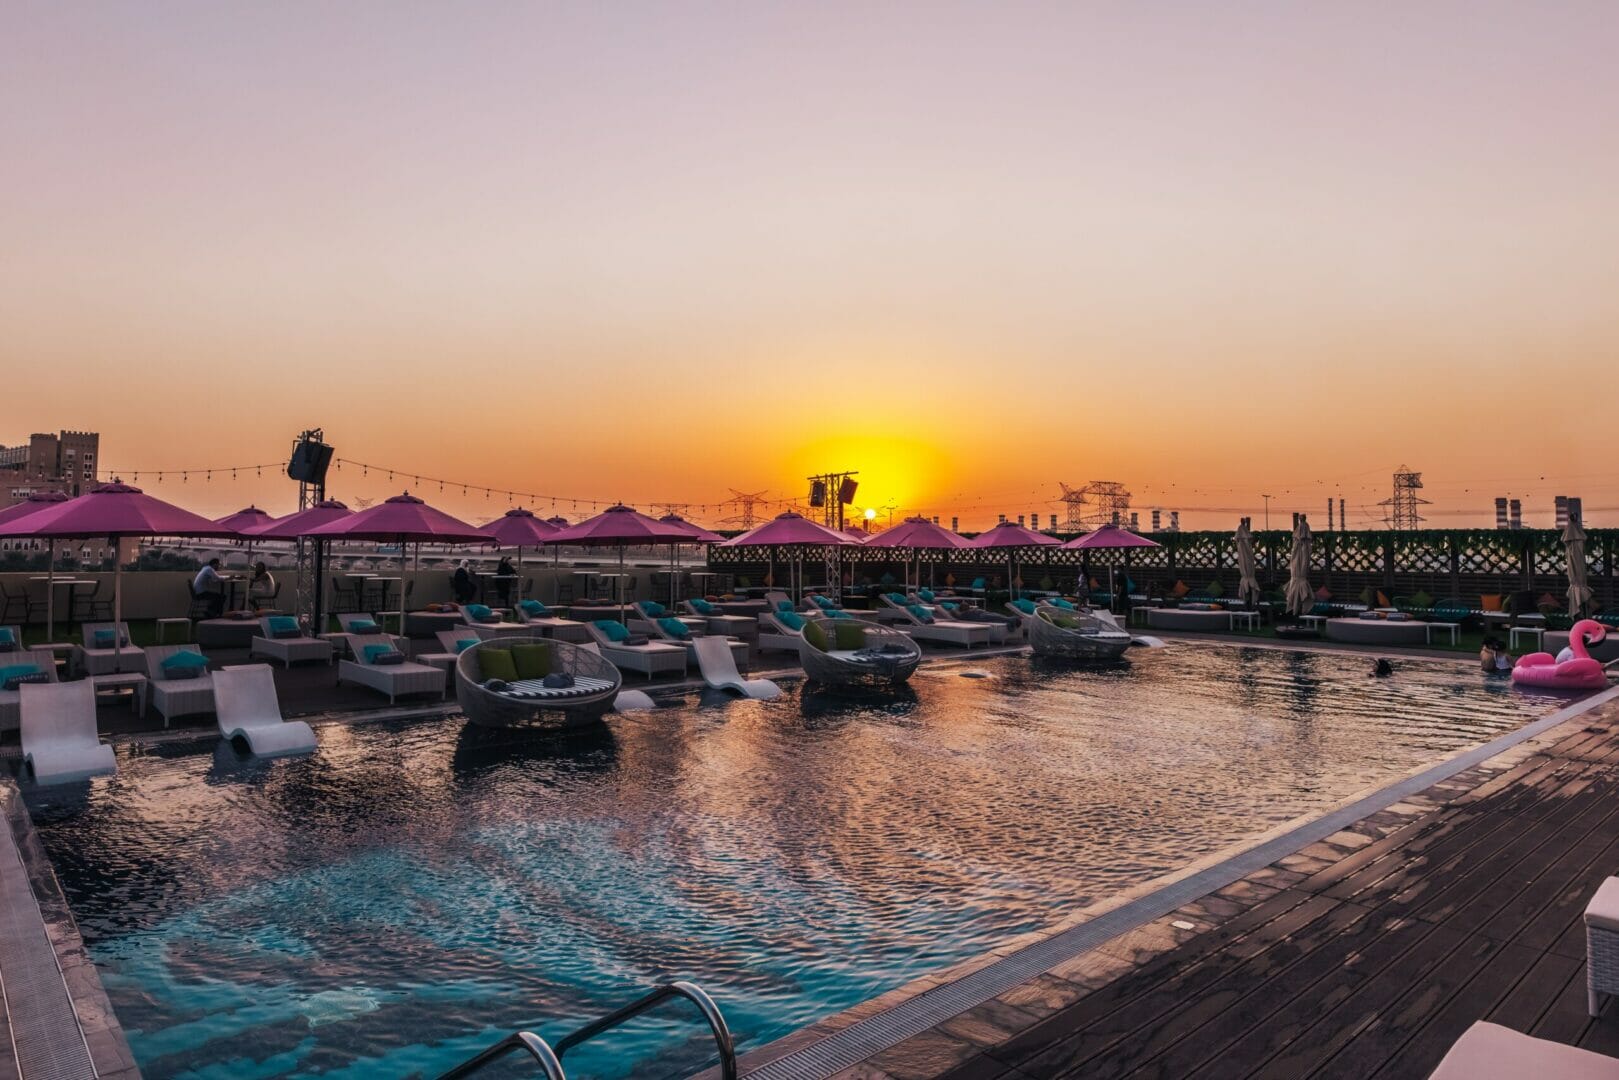 An instagrammers dream arrives in Dubai this weekend – Missippis rooftop bar & hub to open this Friday.